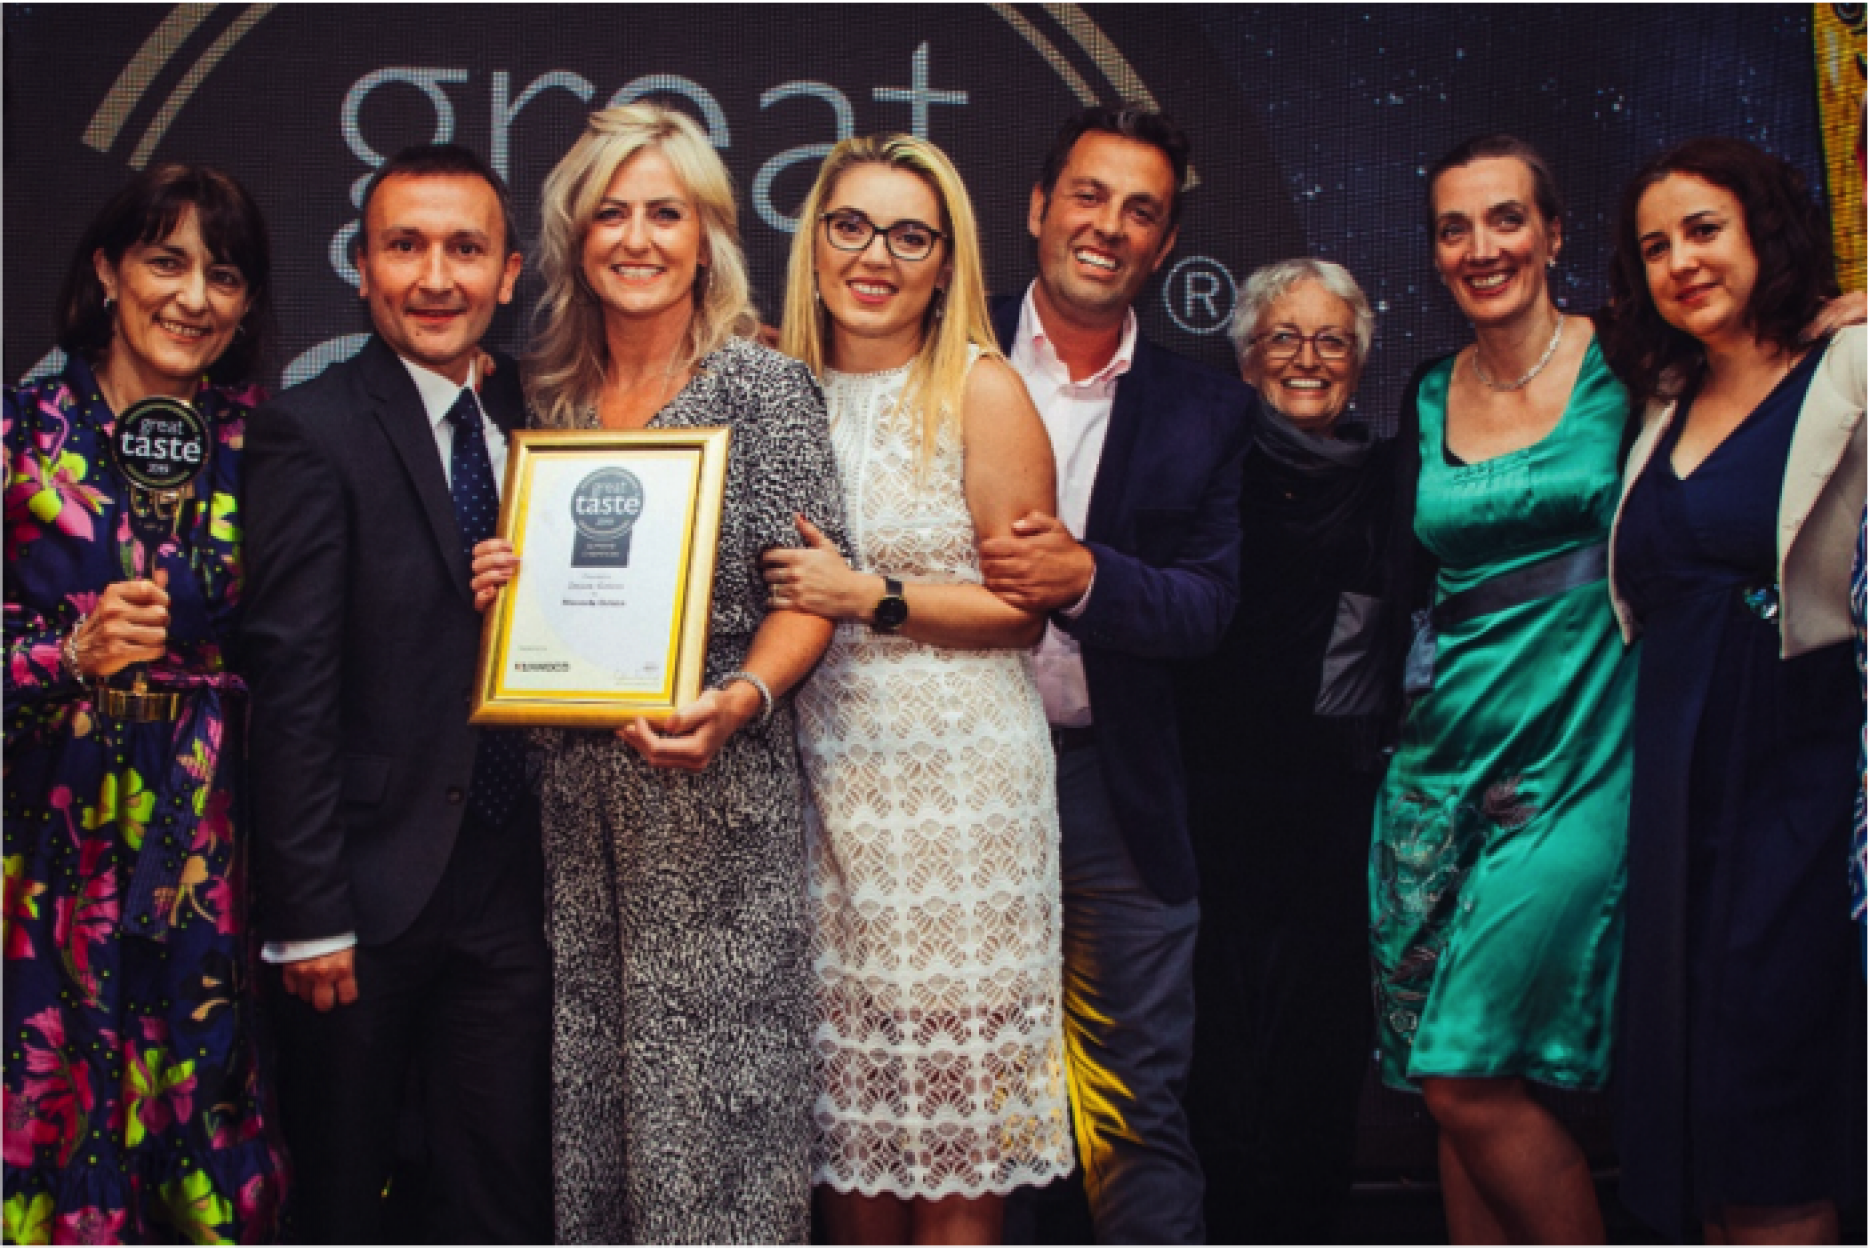 Swoon Gelato named Supreme Champion at Great Taste 2019 